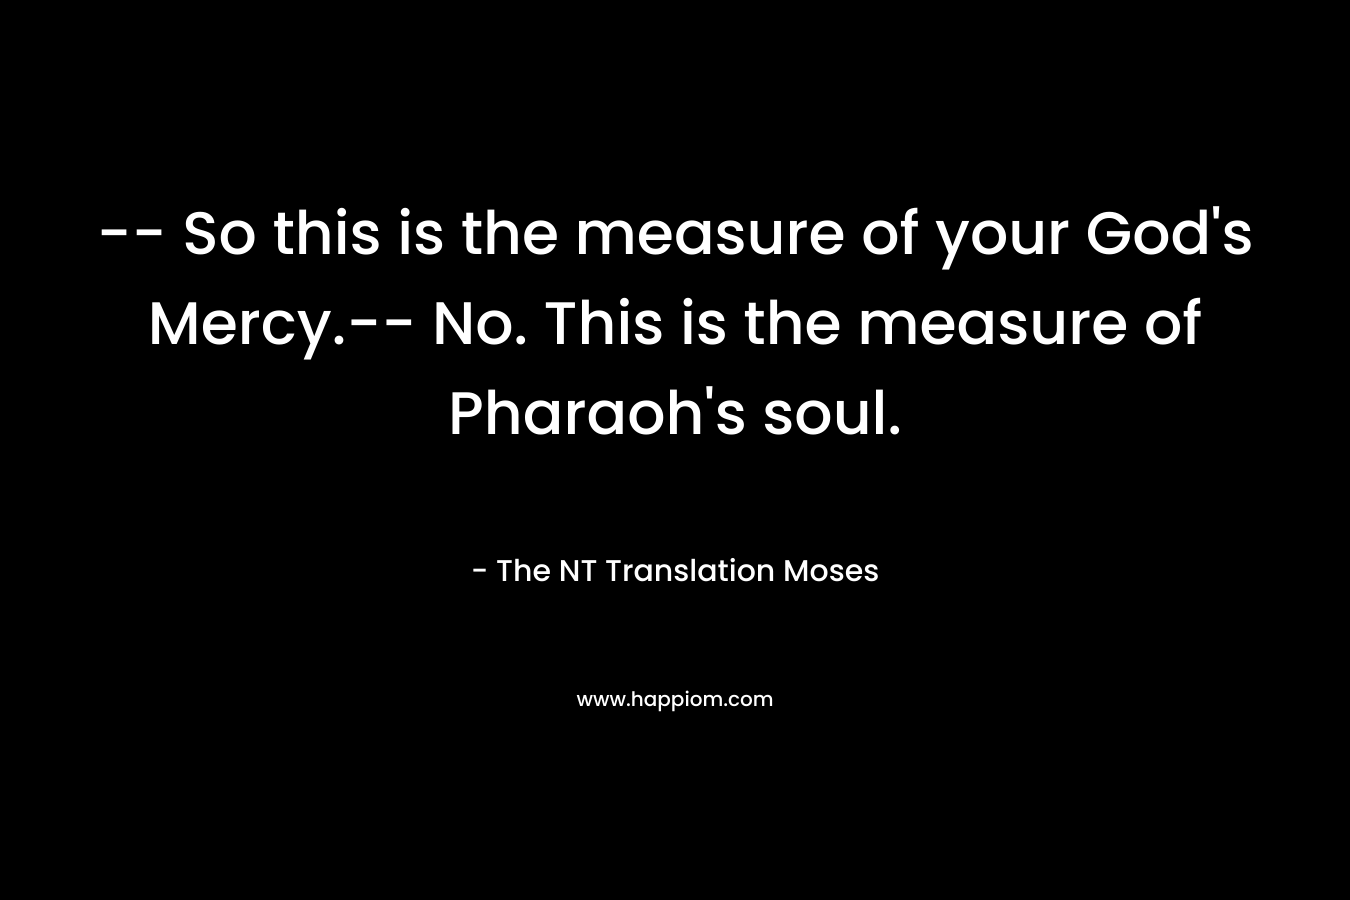 — So this is the measure of your God’s Mercy.– No. This is the measure of Pharaoh’s soul. – The NT Translation Moses